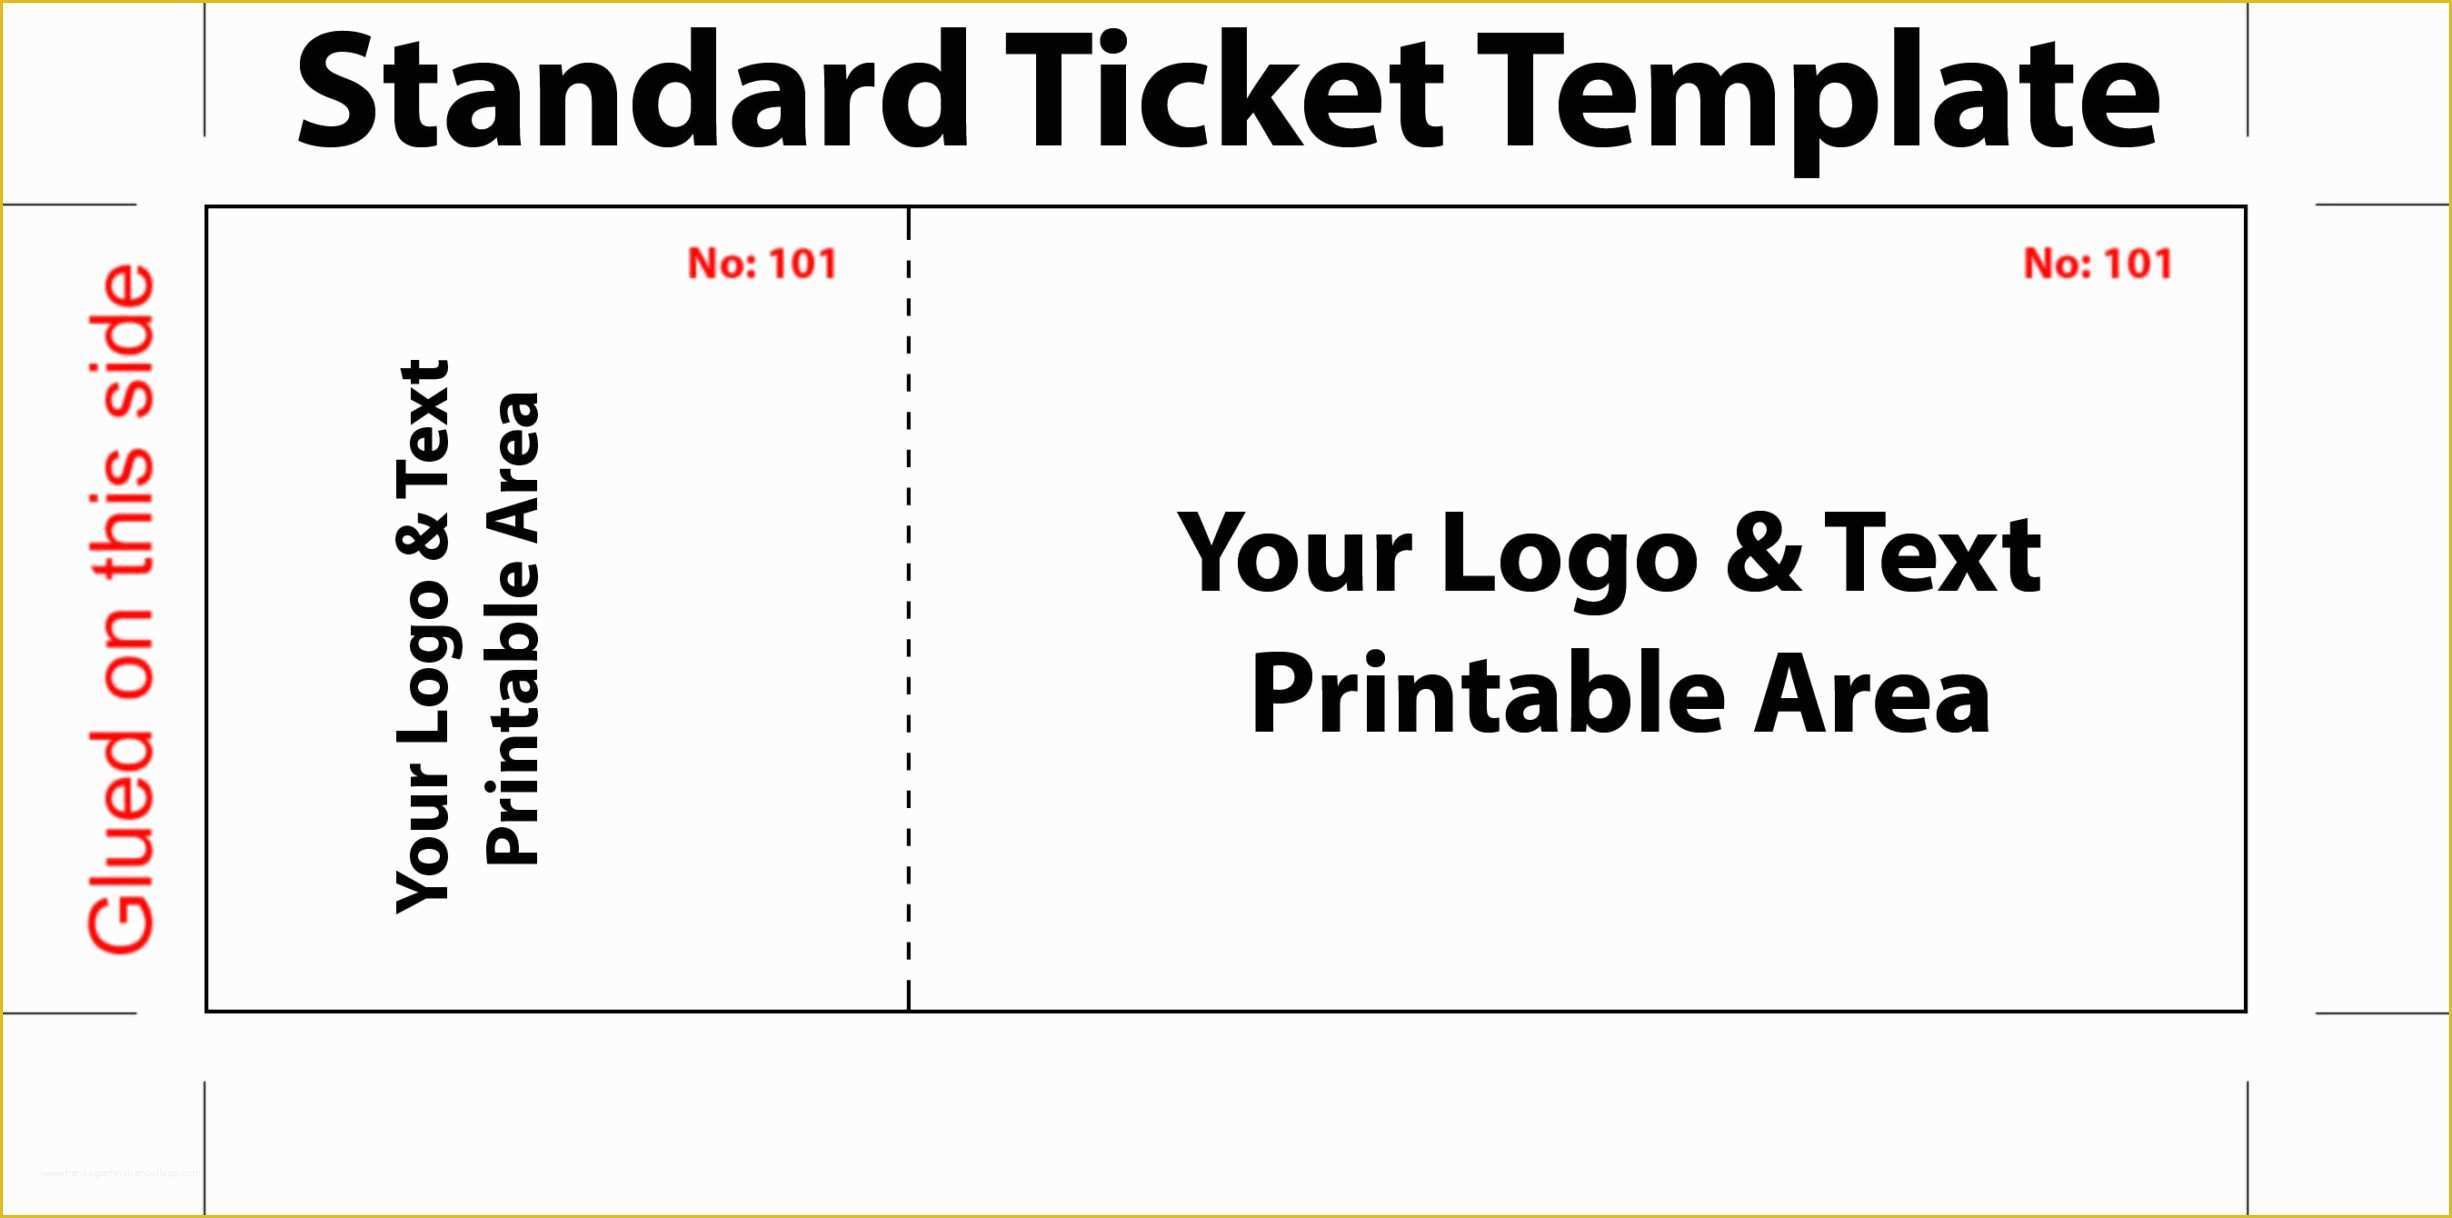 Free Ticket Template Word Of Ticket Layout Template Portablegasgrillweber